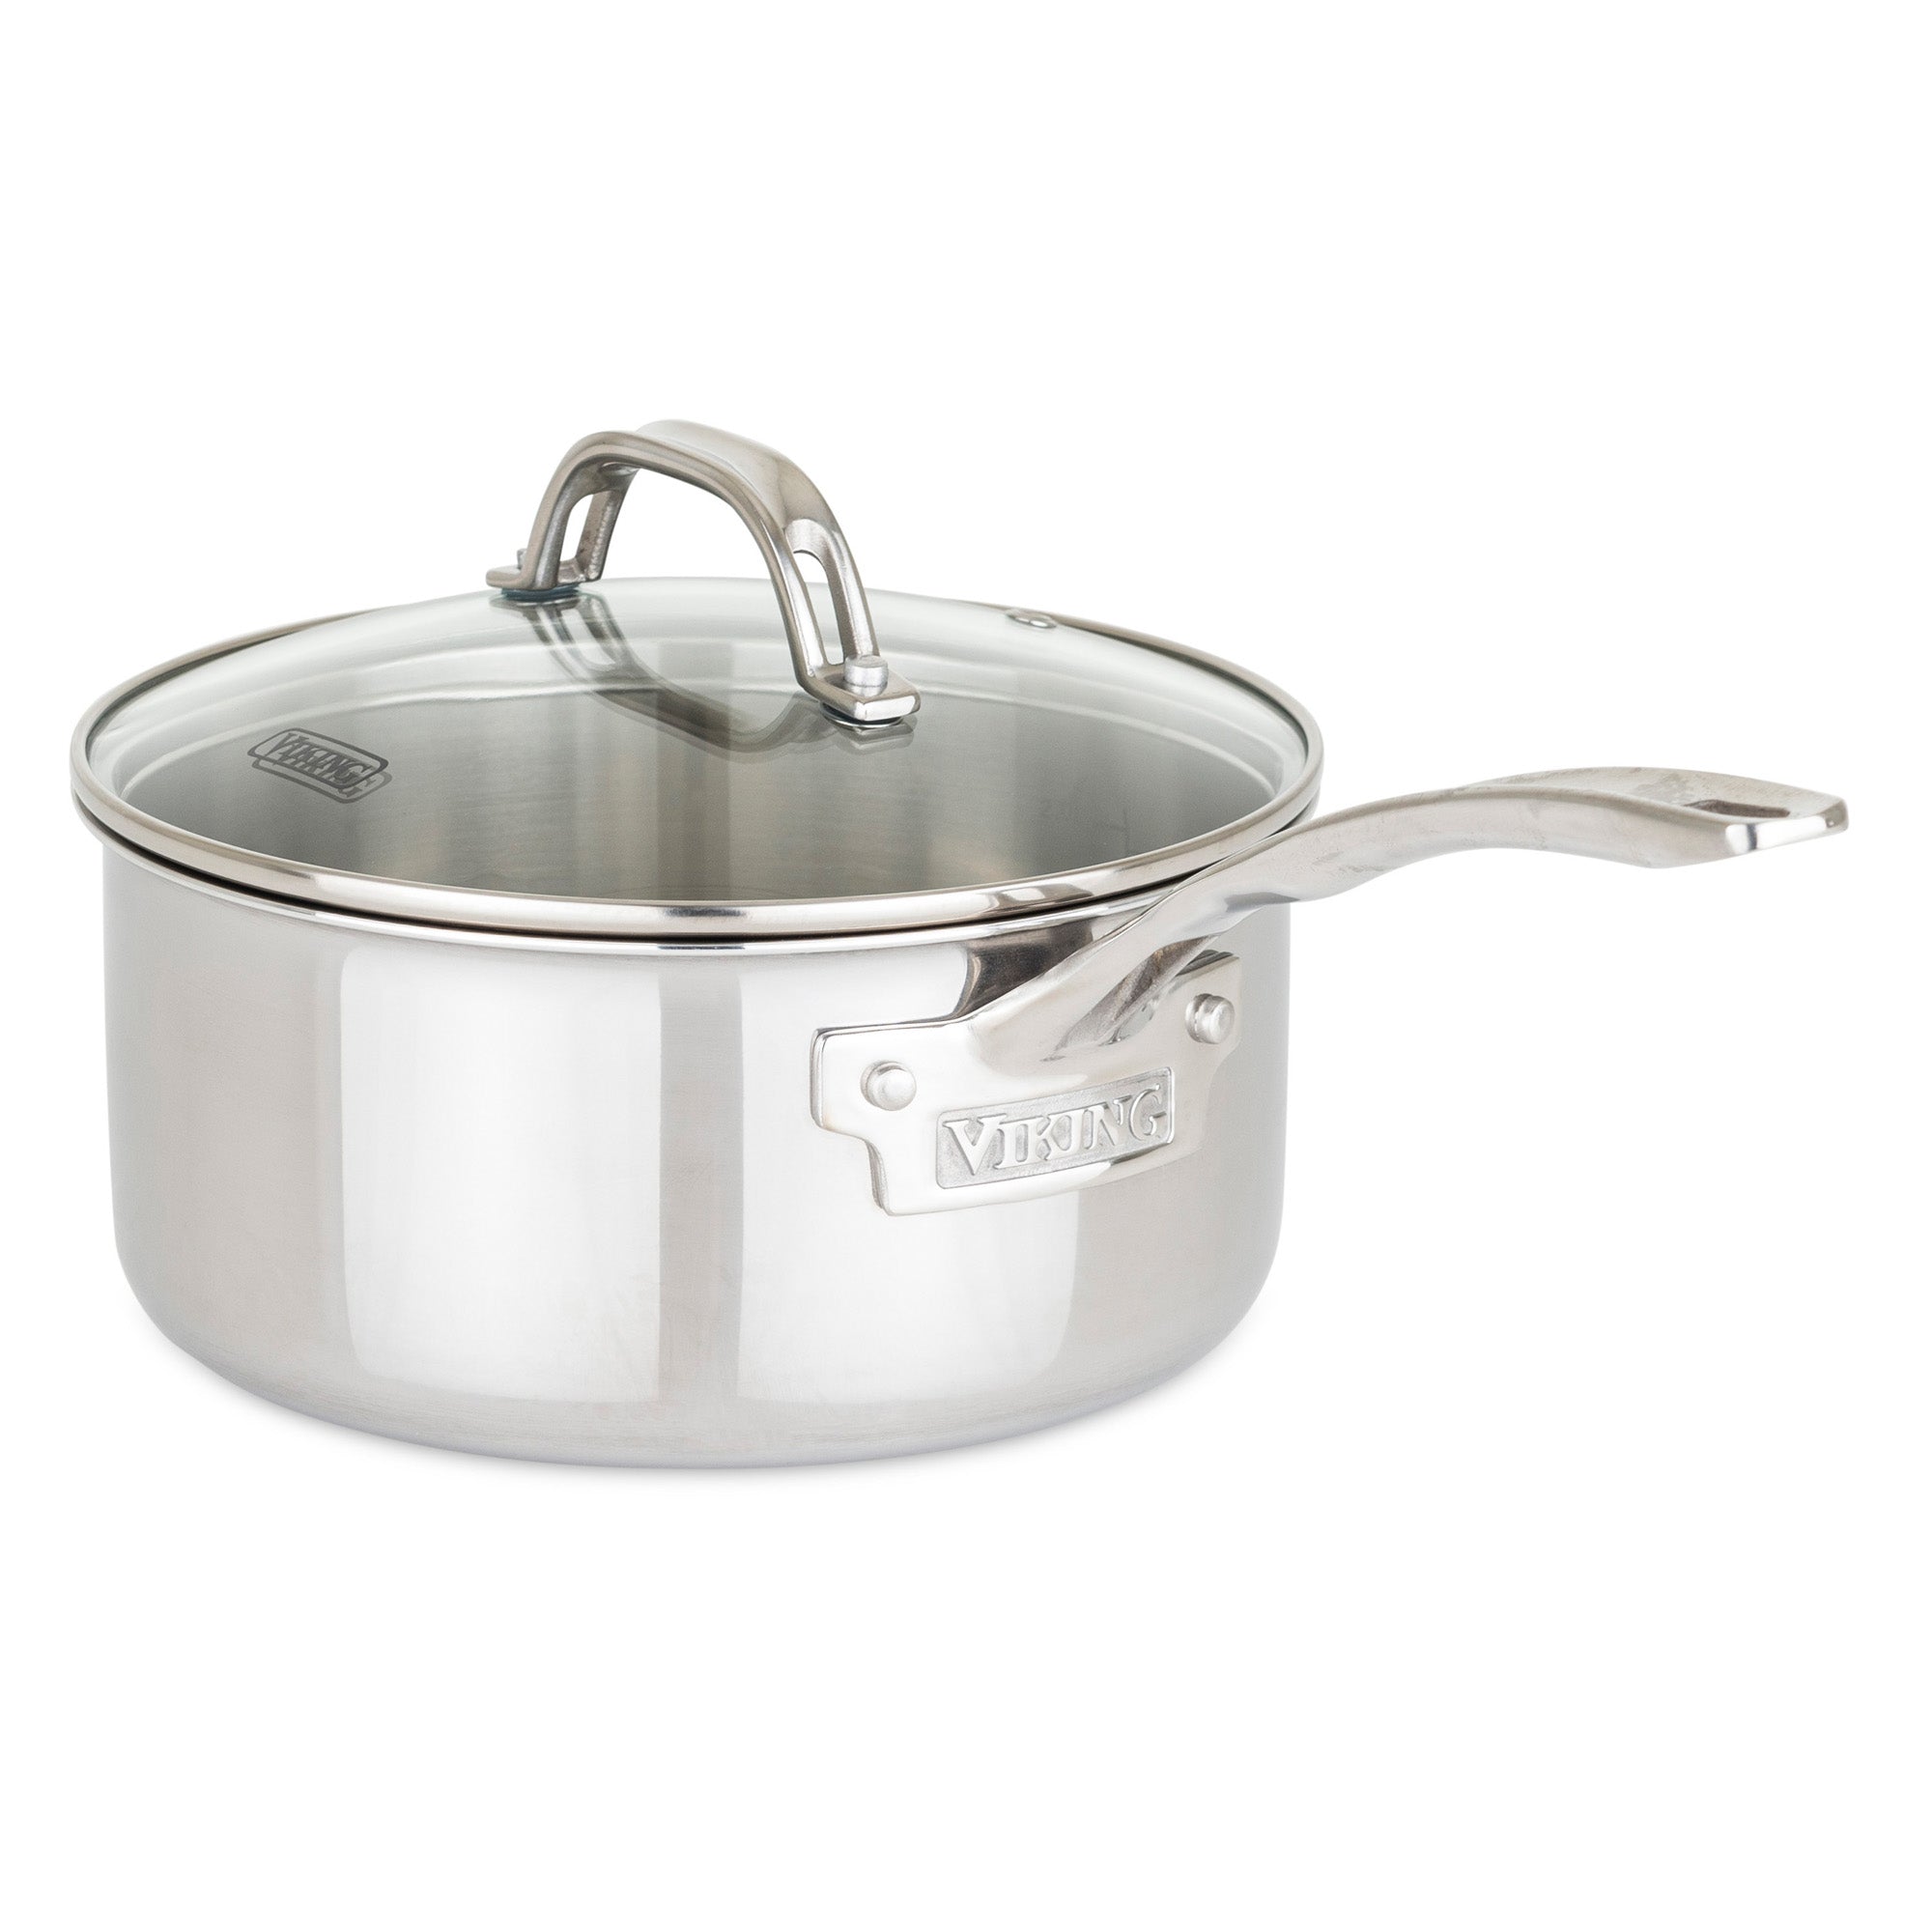 Le Creuset ~ Stainless Steel ~ 7 Piece Set (10 Fry Pan, 2 qt. Saucepan w/ Lid, 3 qt. Saute Pan w/Lid, 7 qt. Stockpot w/Lid), Price $580.00 in  Madison, MS from Persnickety